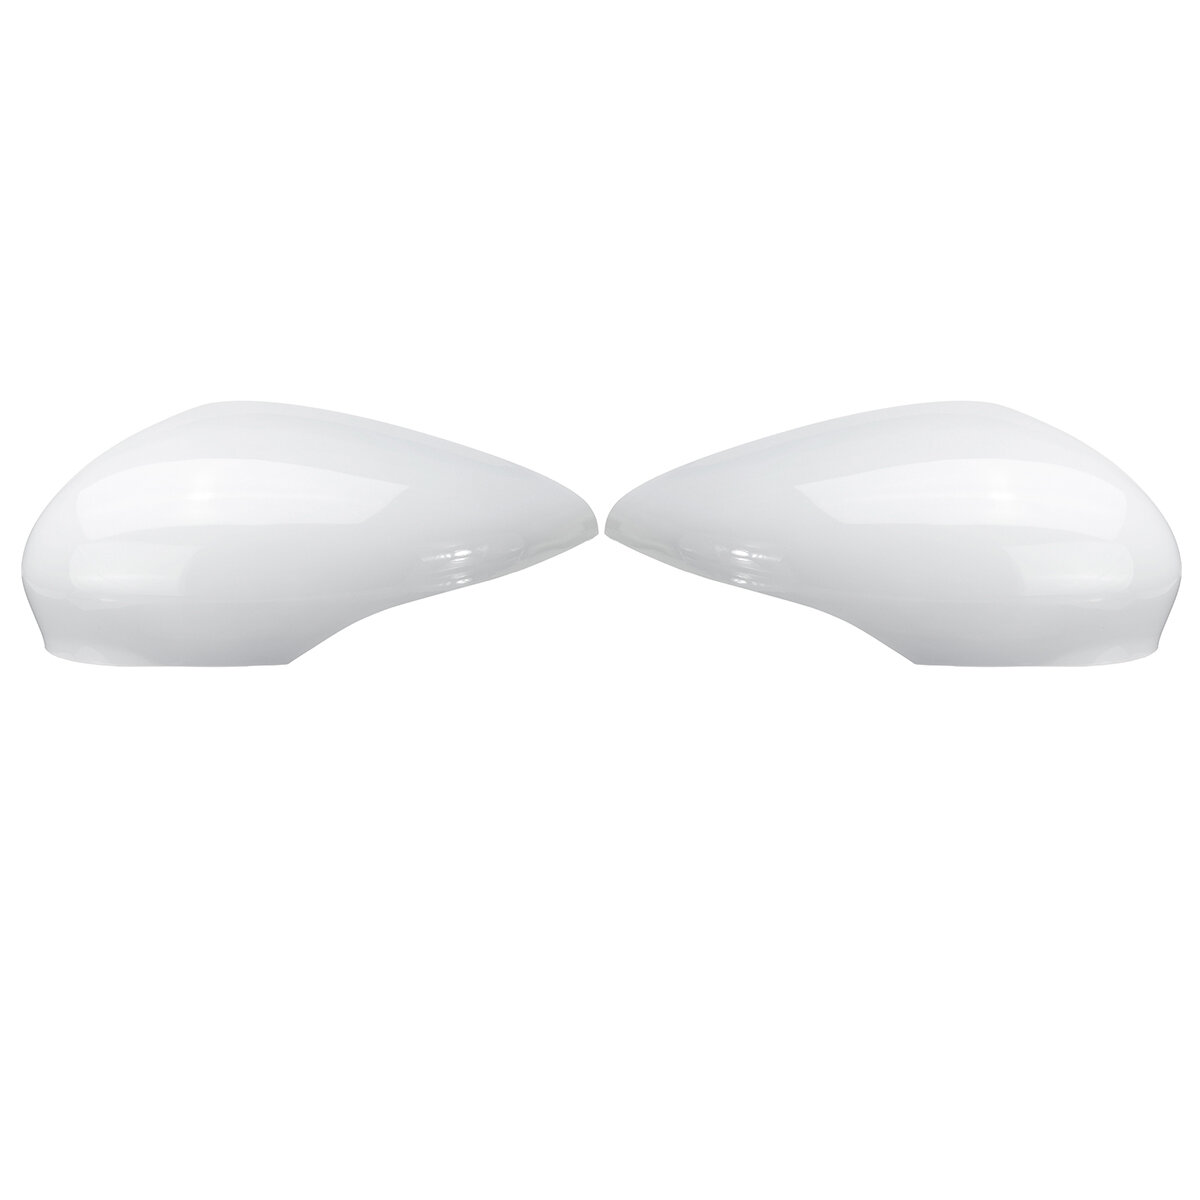 

2PCS White Door Wing Mirror Cover Rear View Left Right Side For Ford Fiesta MK7 2009-2015